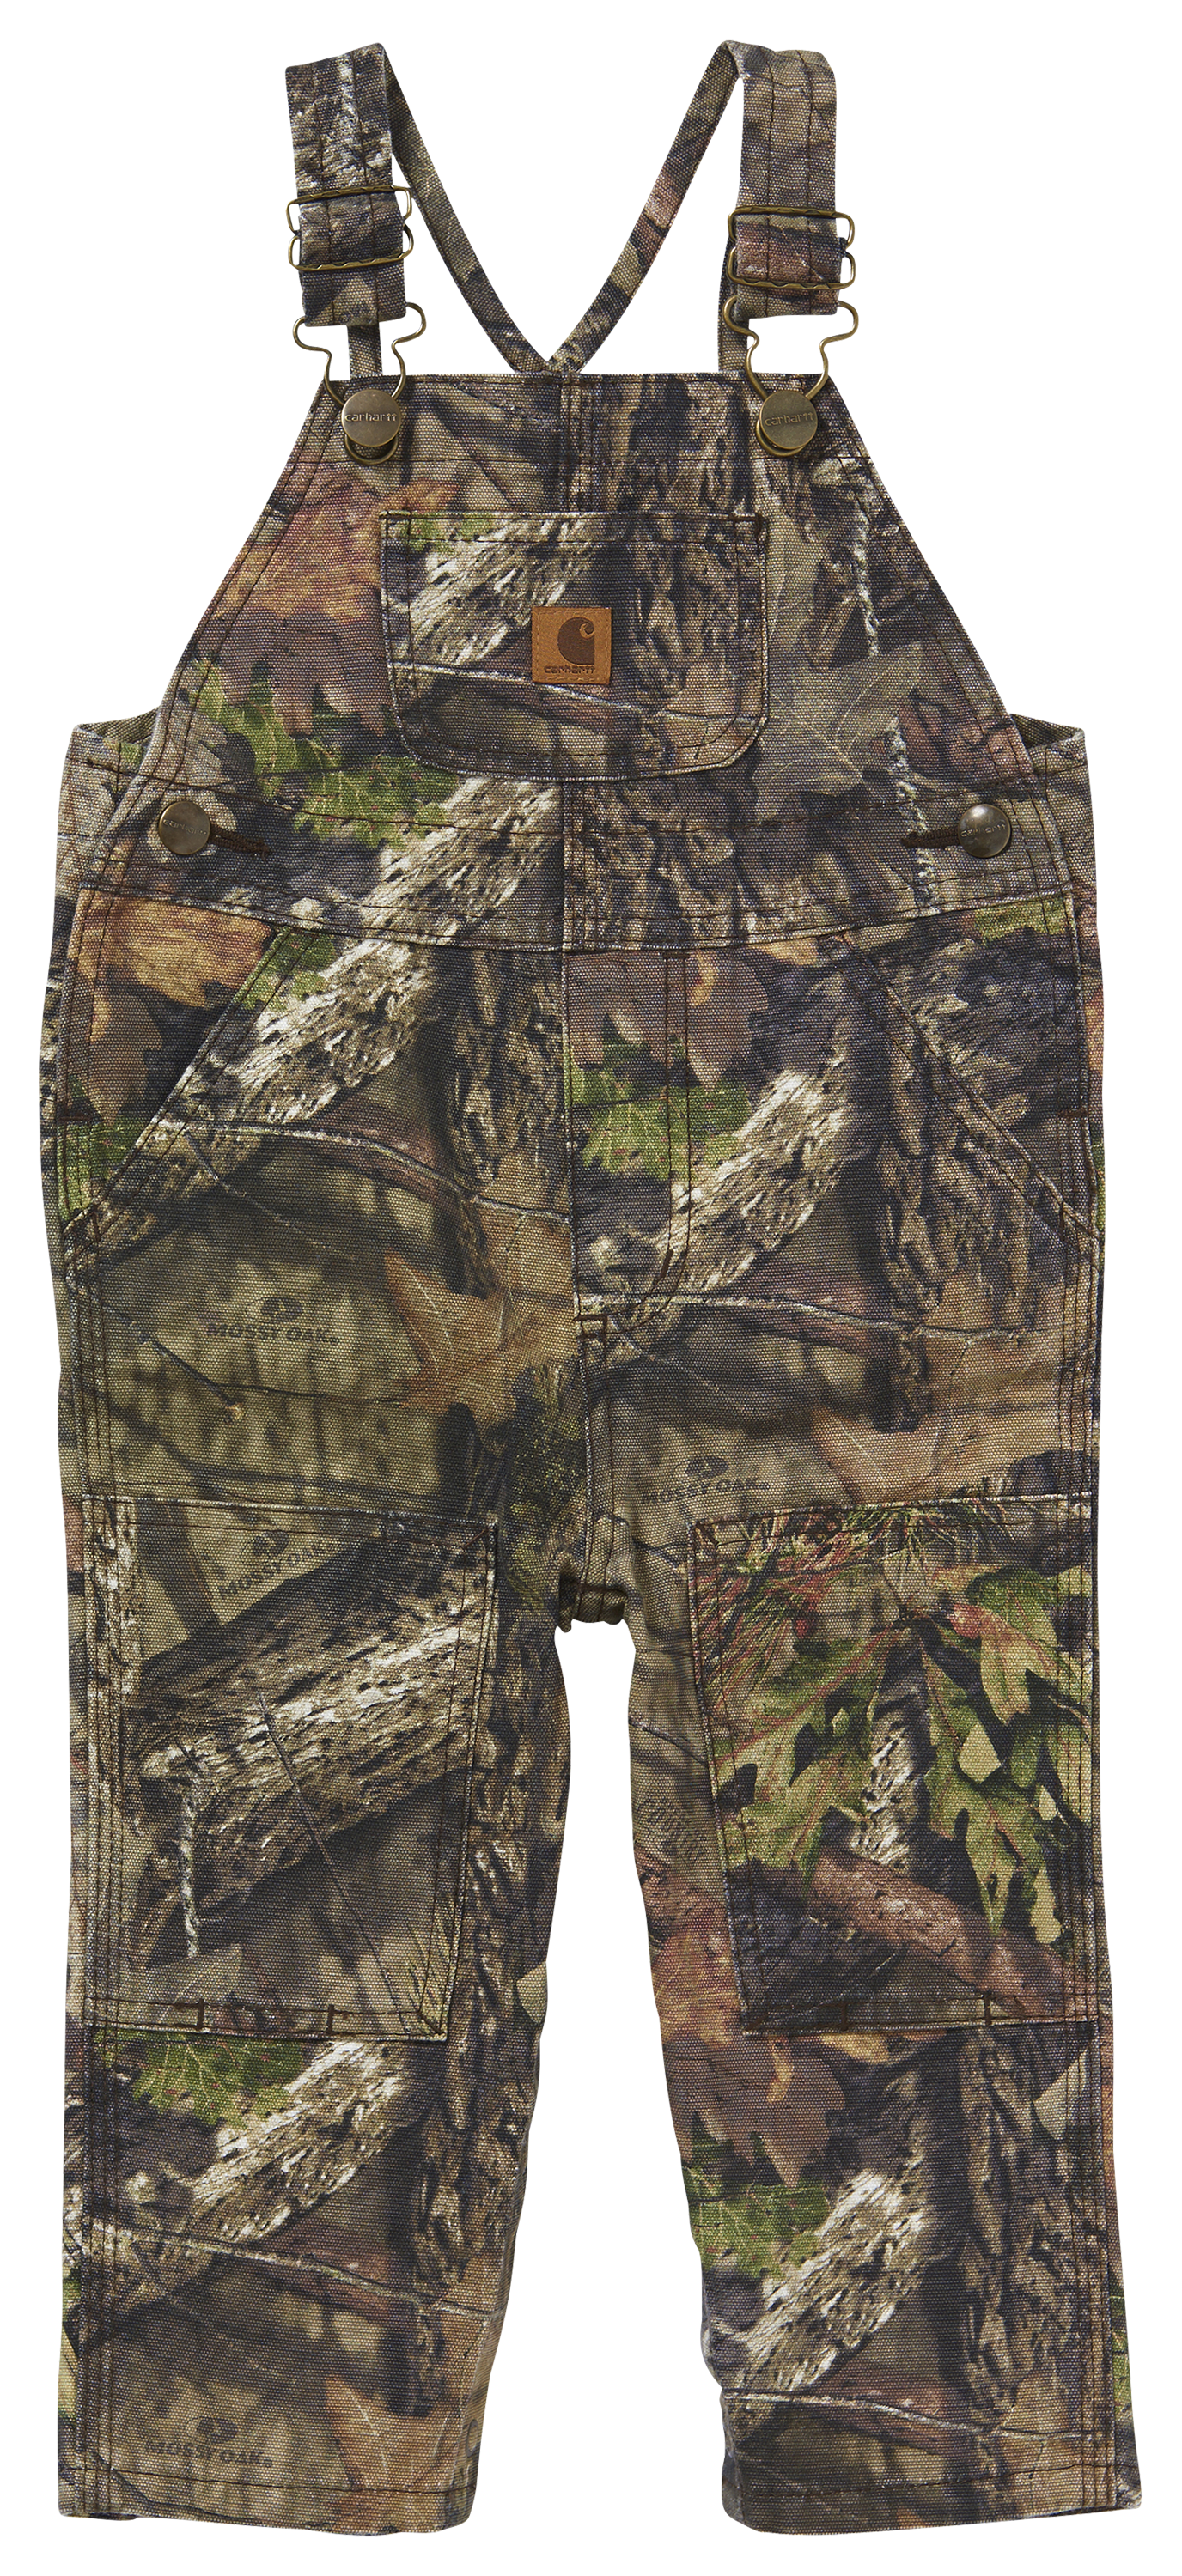 Carhartt Camo Canvas Bib Overalls for Toddlers Mossy Oak Break Up Country 6 Months